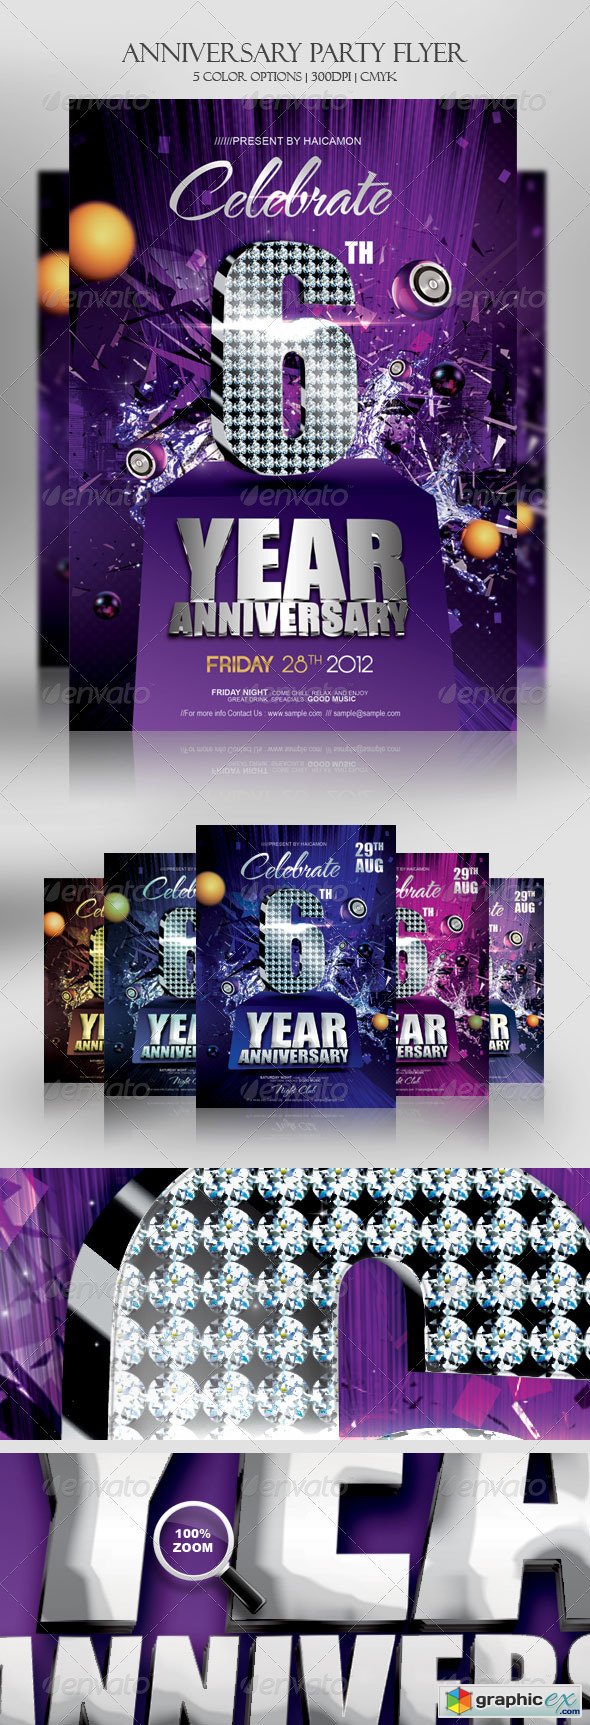 Anniversary Party Invitations Flyer